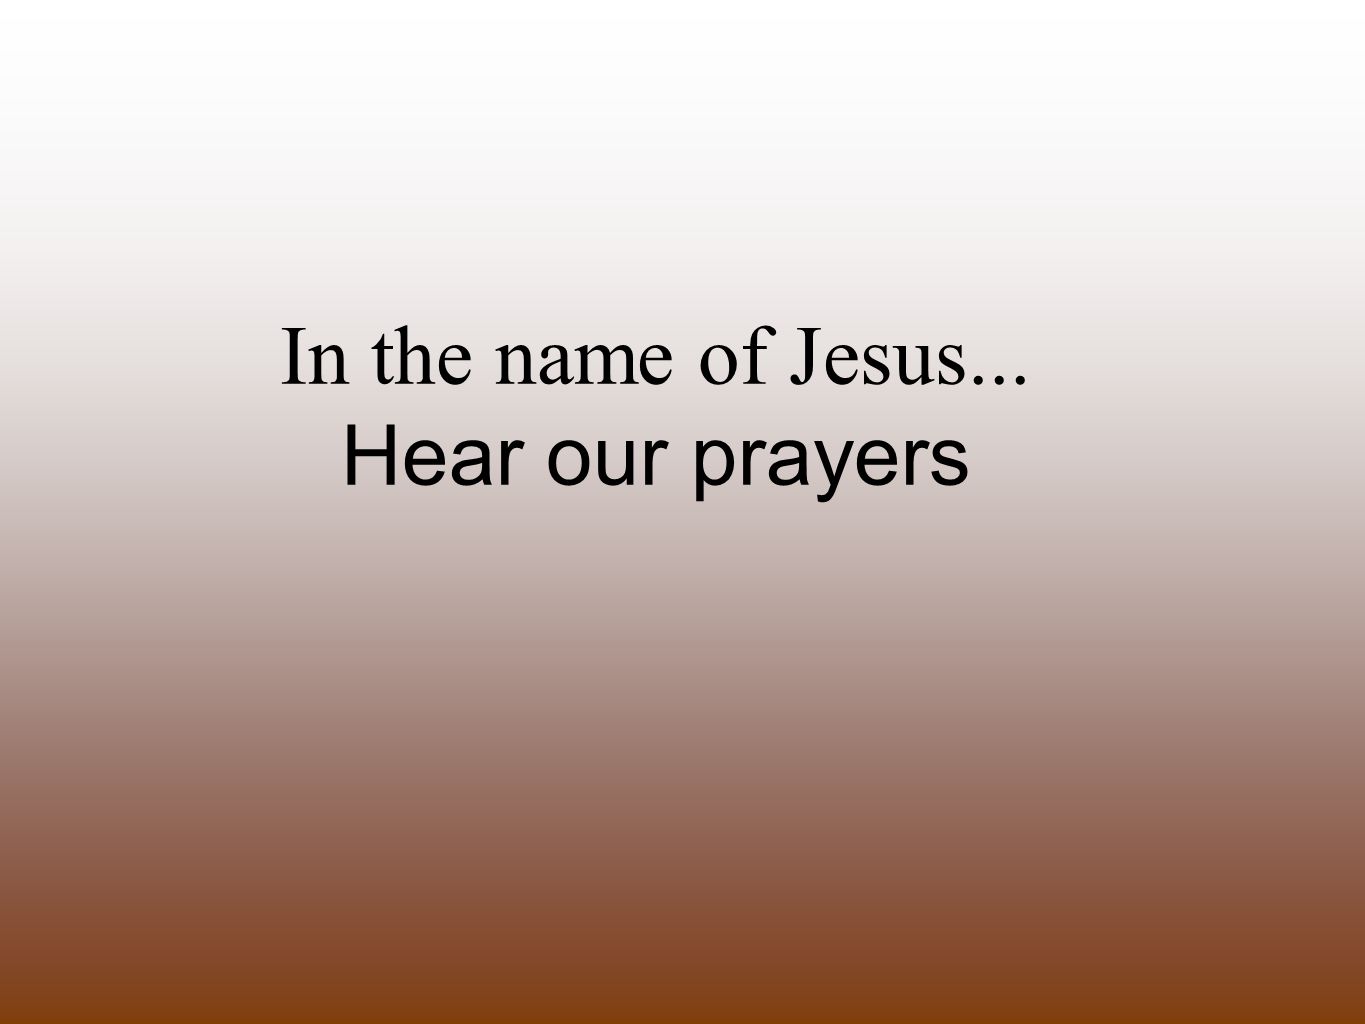 In the name of Jesus... Hear our prayers